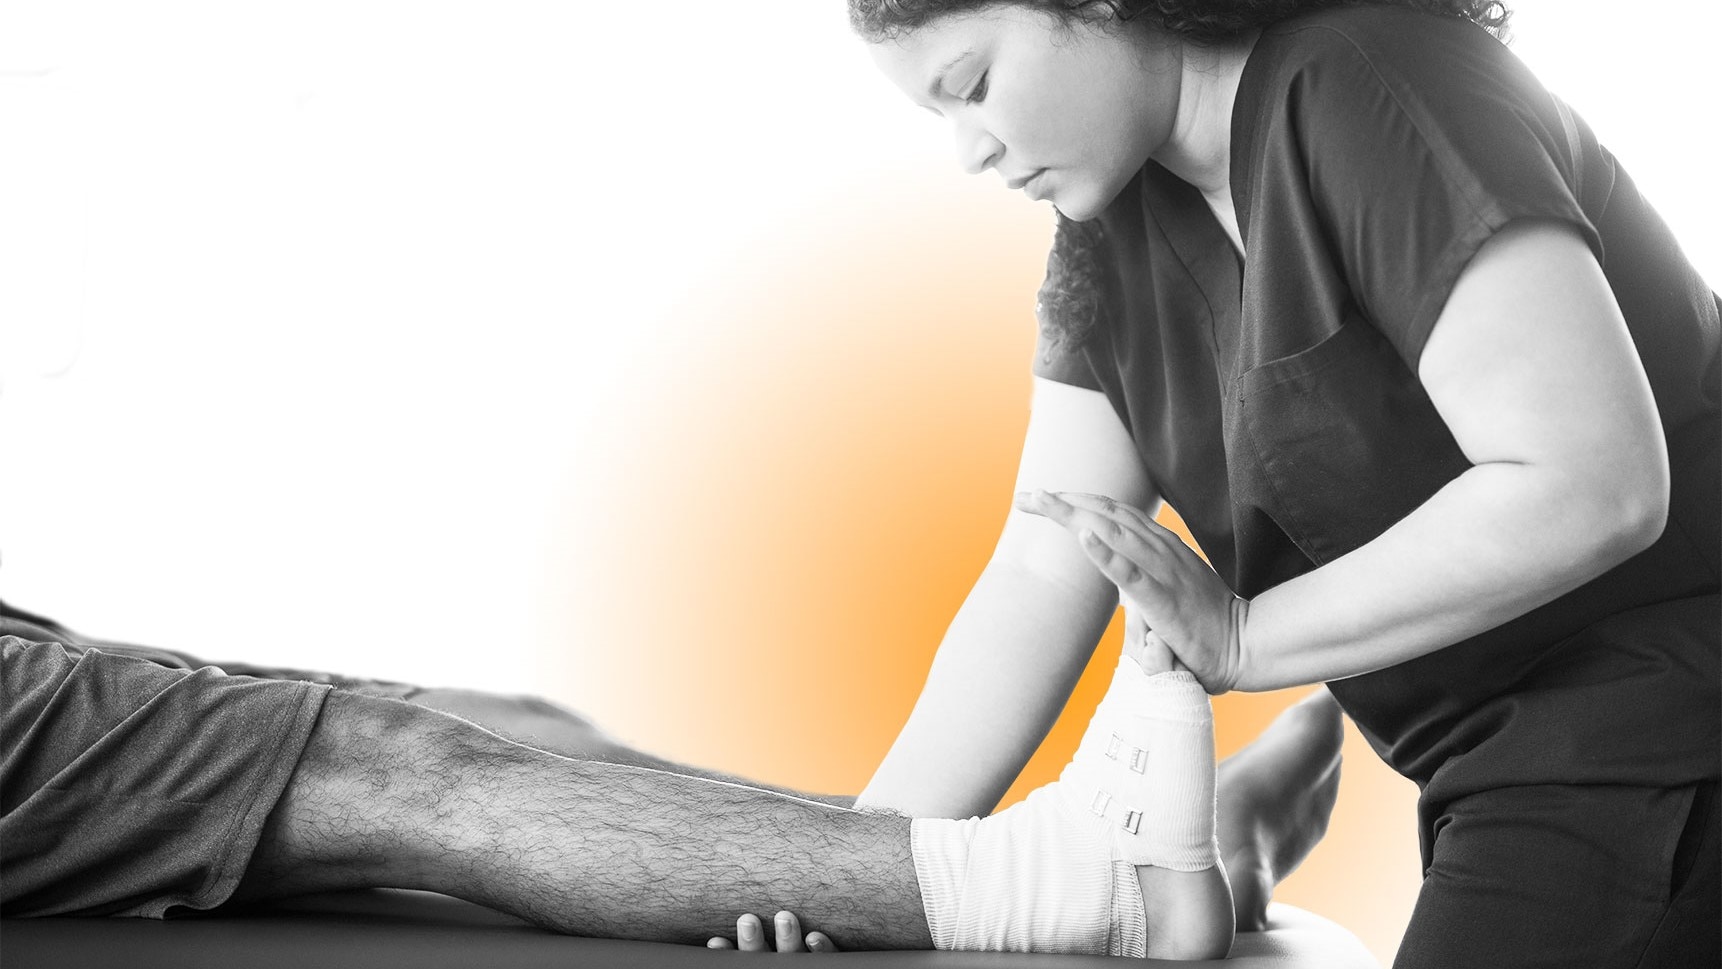 A physical therapist working with a patient experiencing pain.